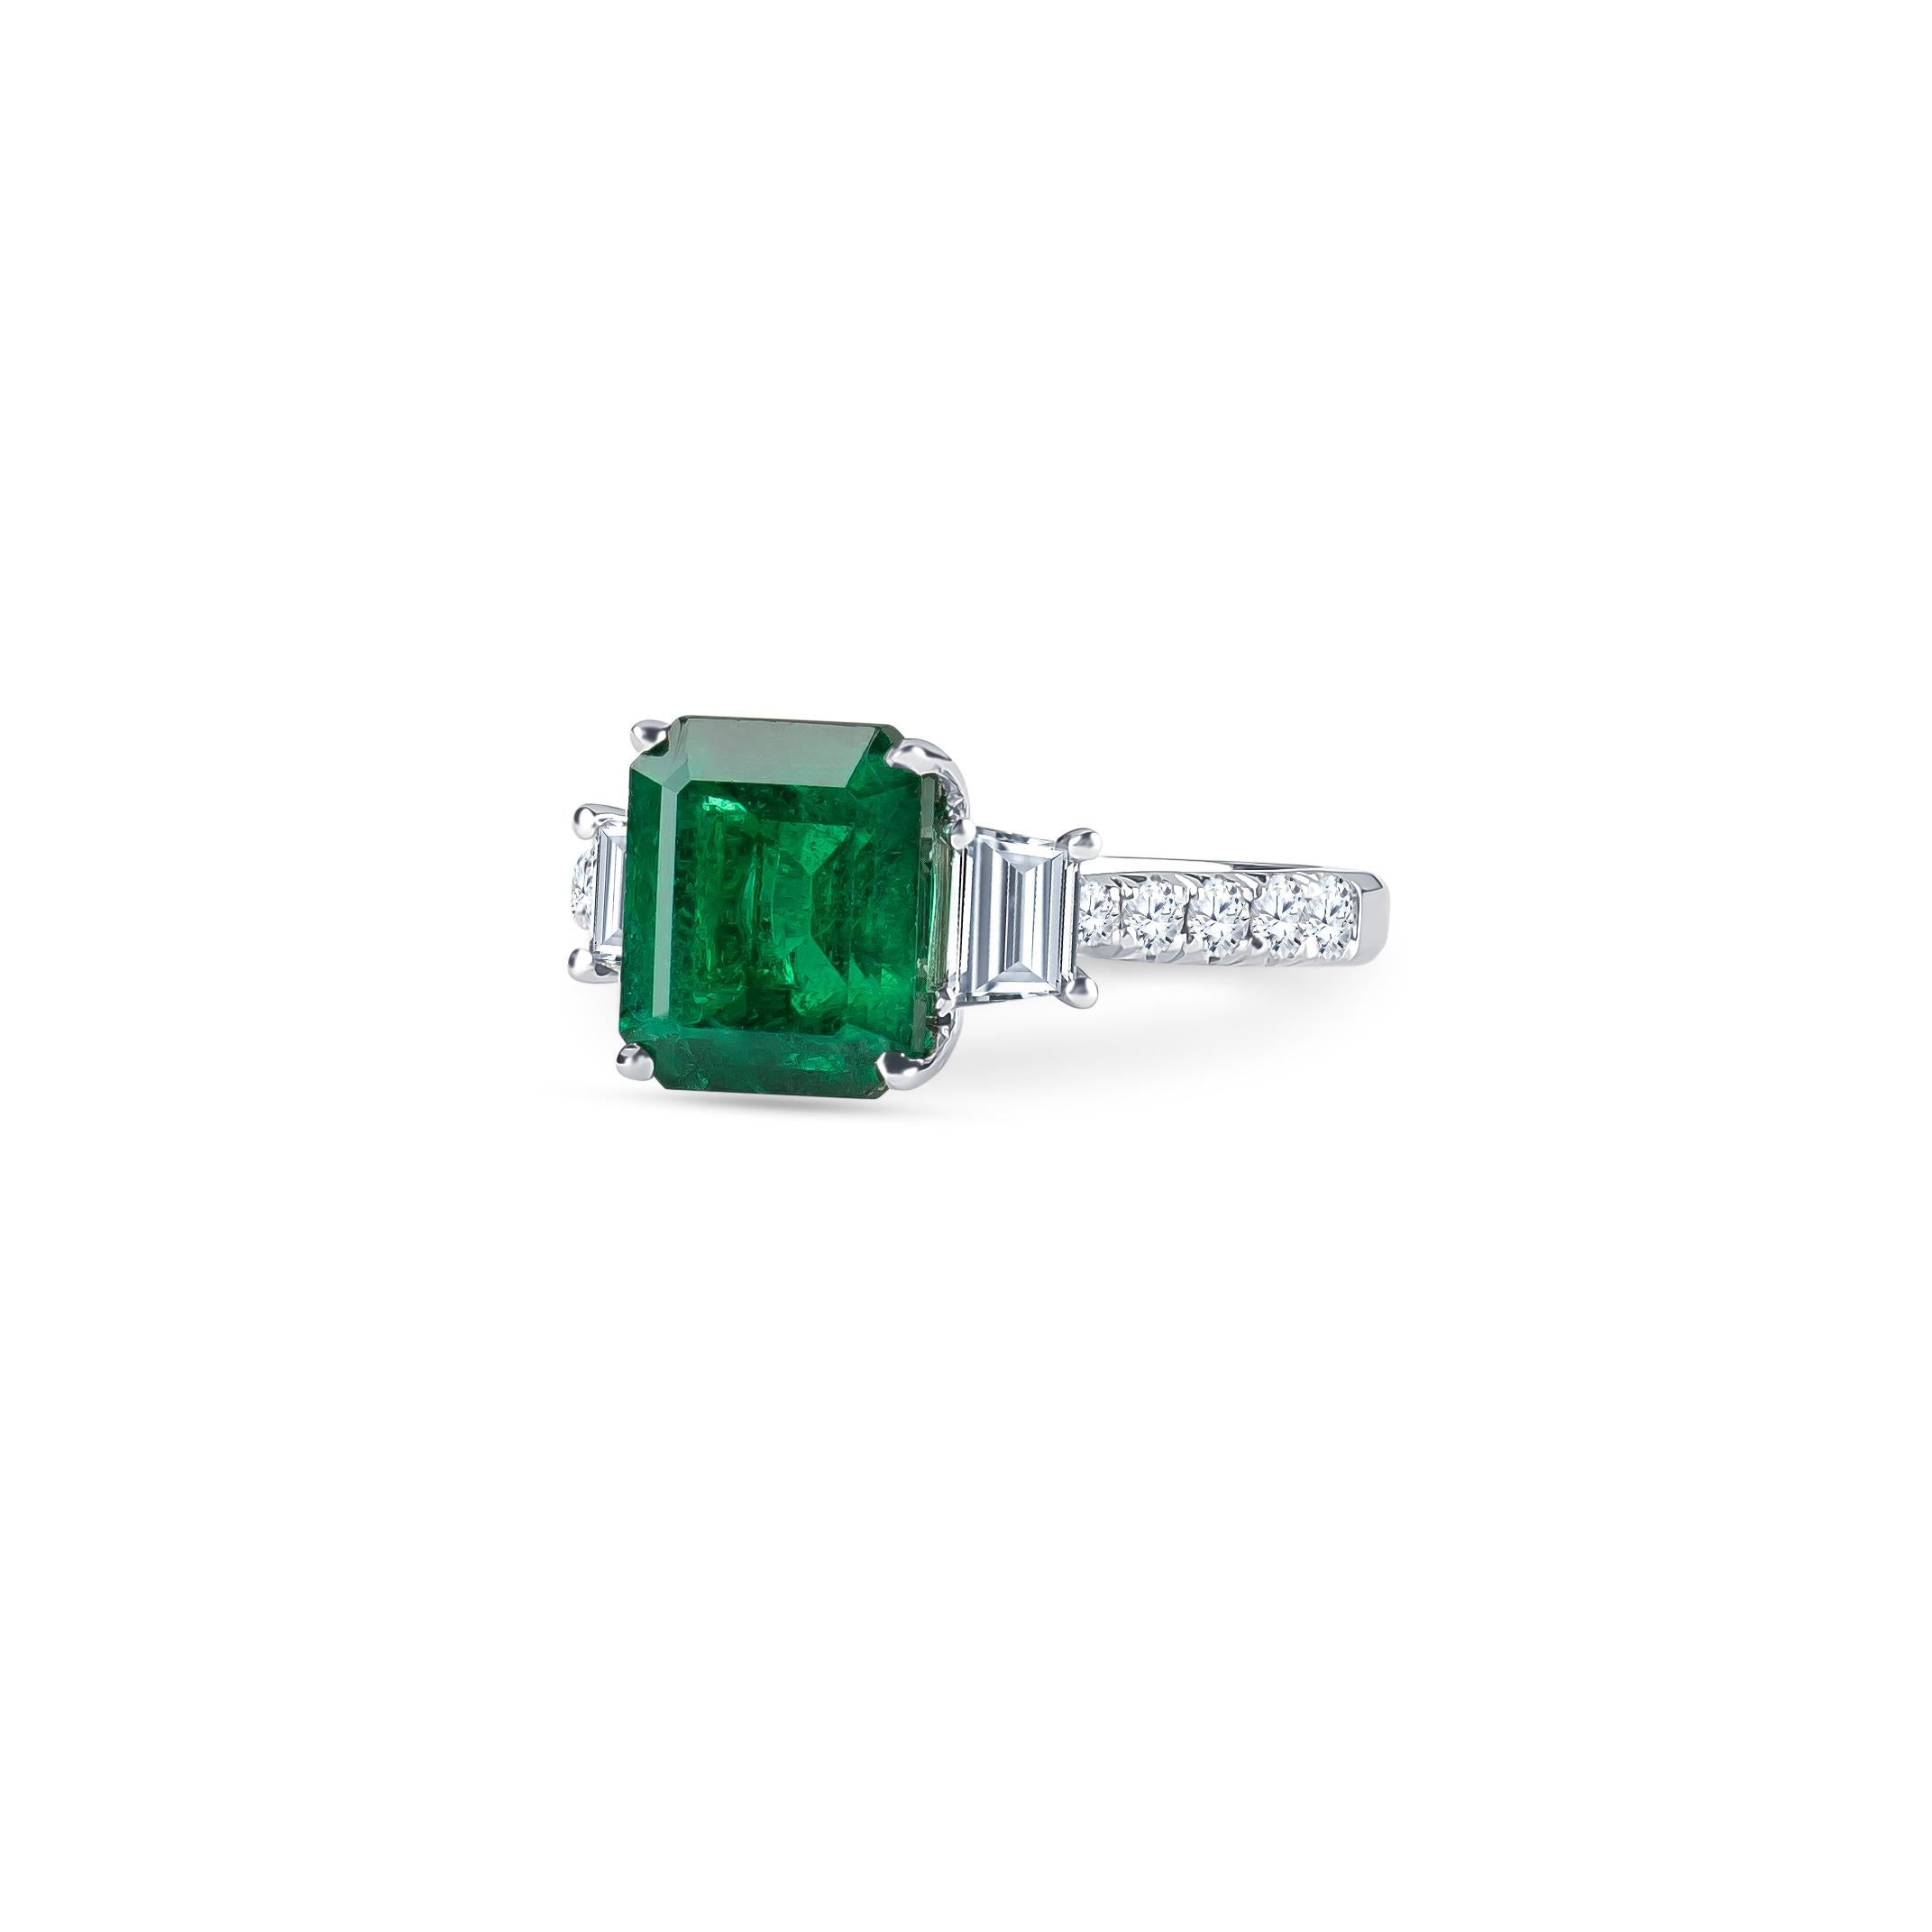 3.06 Carat  natural emerald (AGL certified) in emerald cut with 0.96 carats total weight of trapezoid step-cut & round brilliant diamonds, set in 18K white gold.  Ring size 6, may be resized to larger or smaller upon request. 